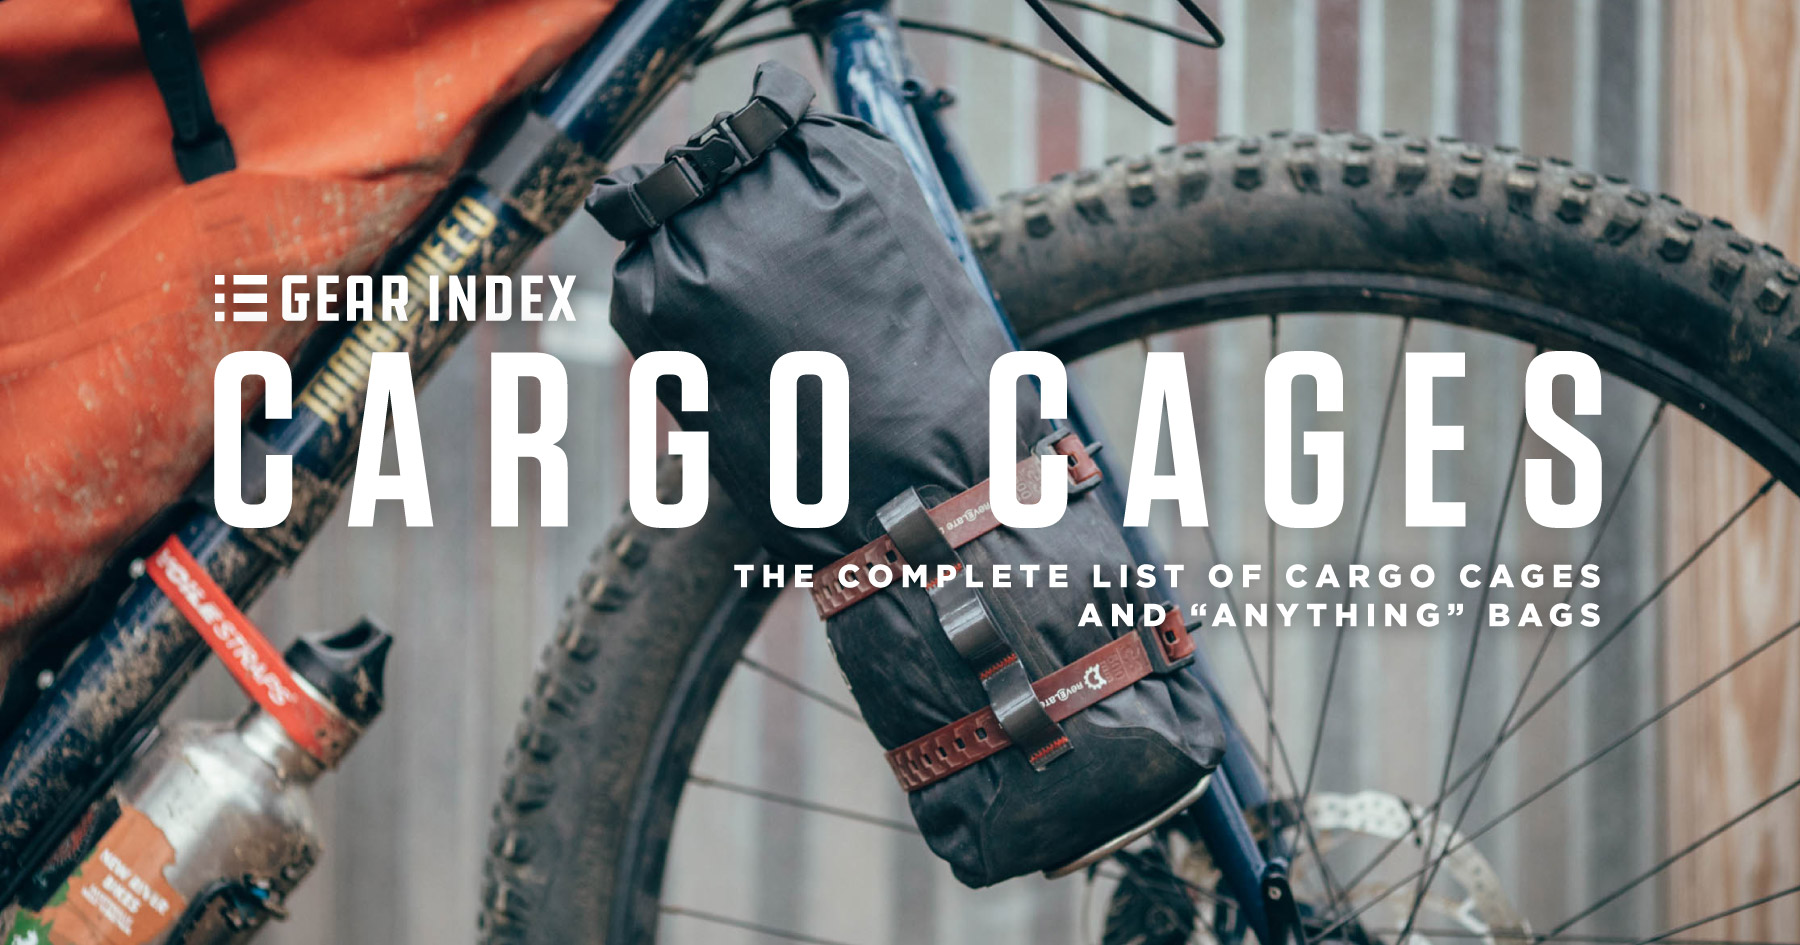 List of Cargo Cages and Anything bags